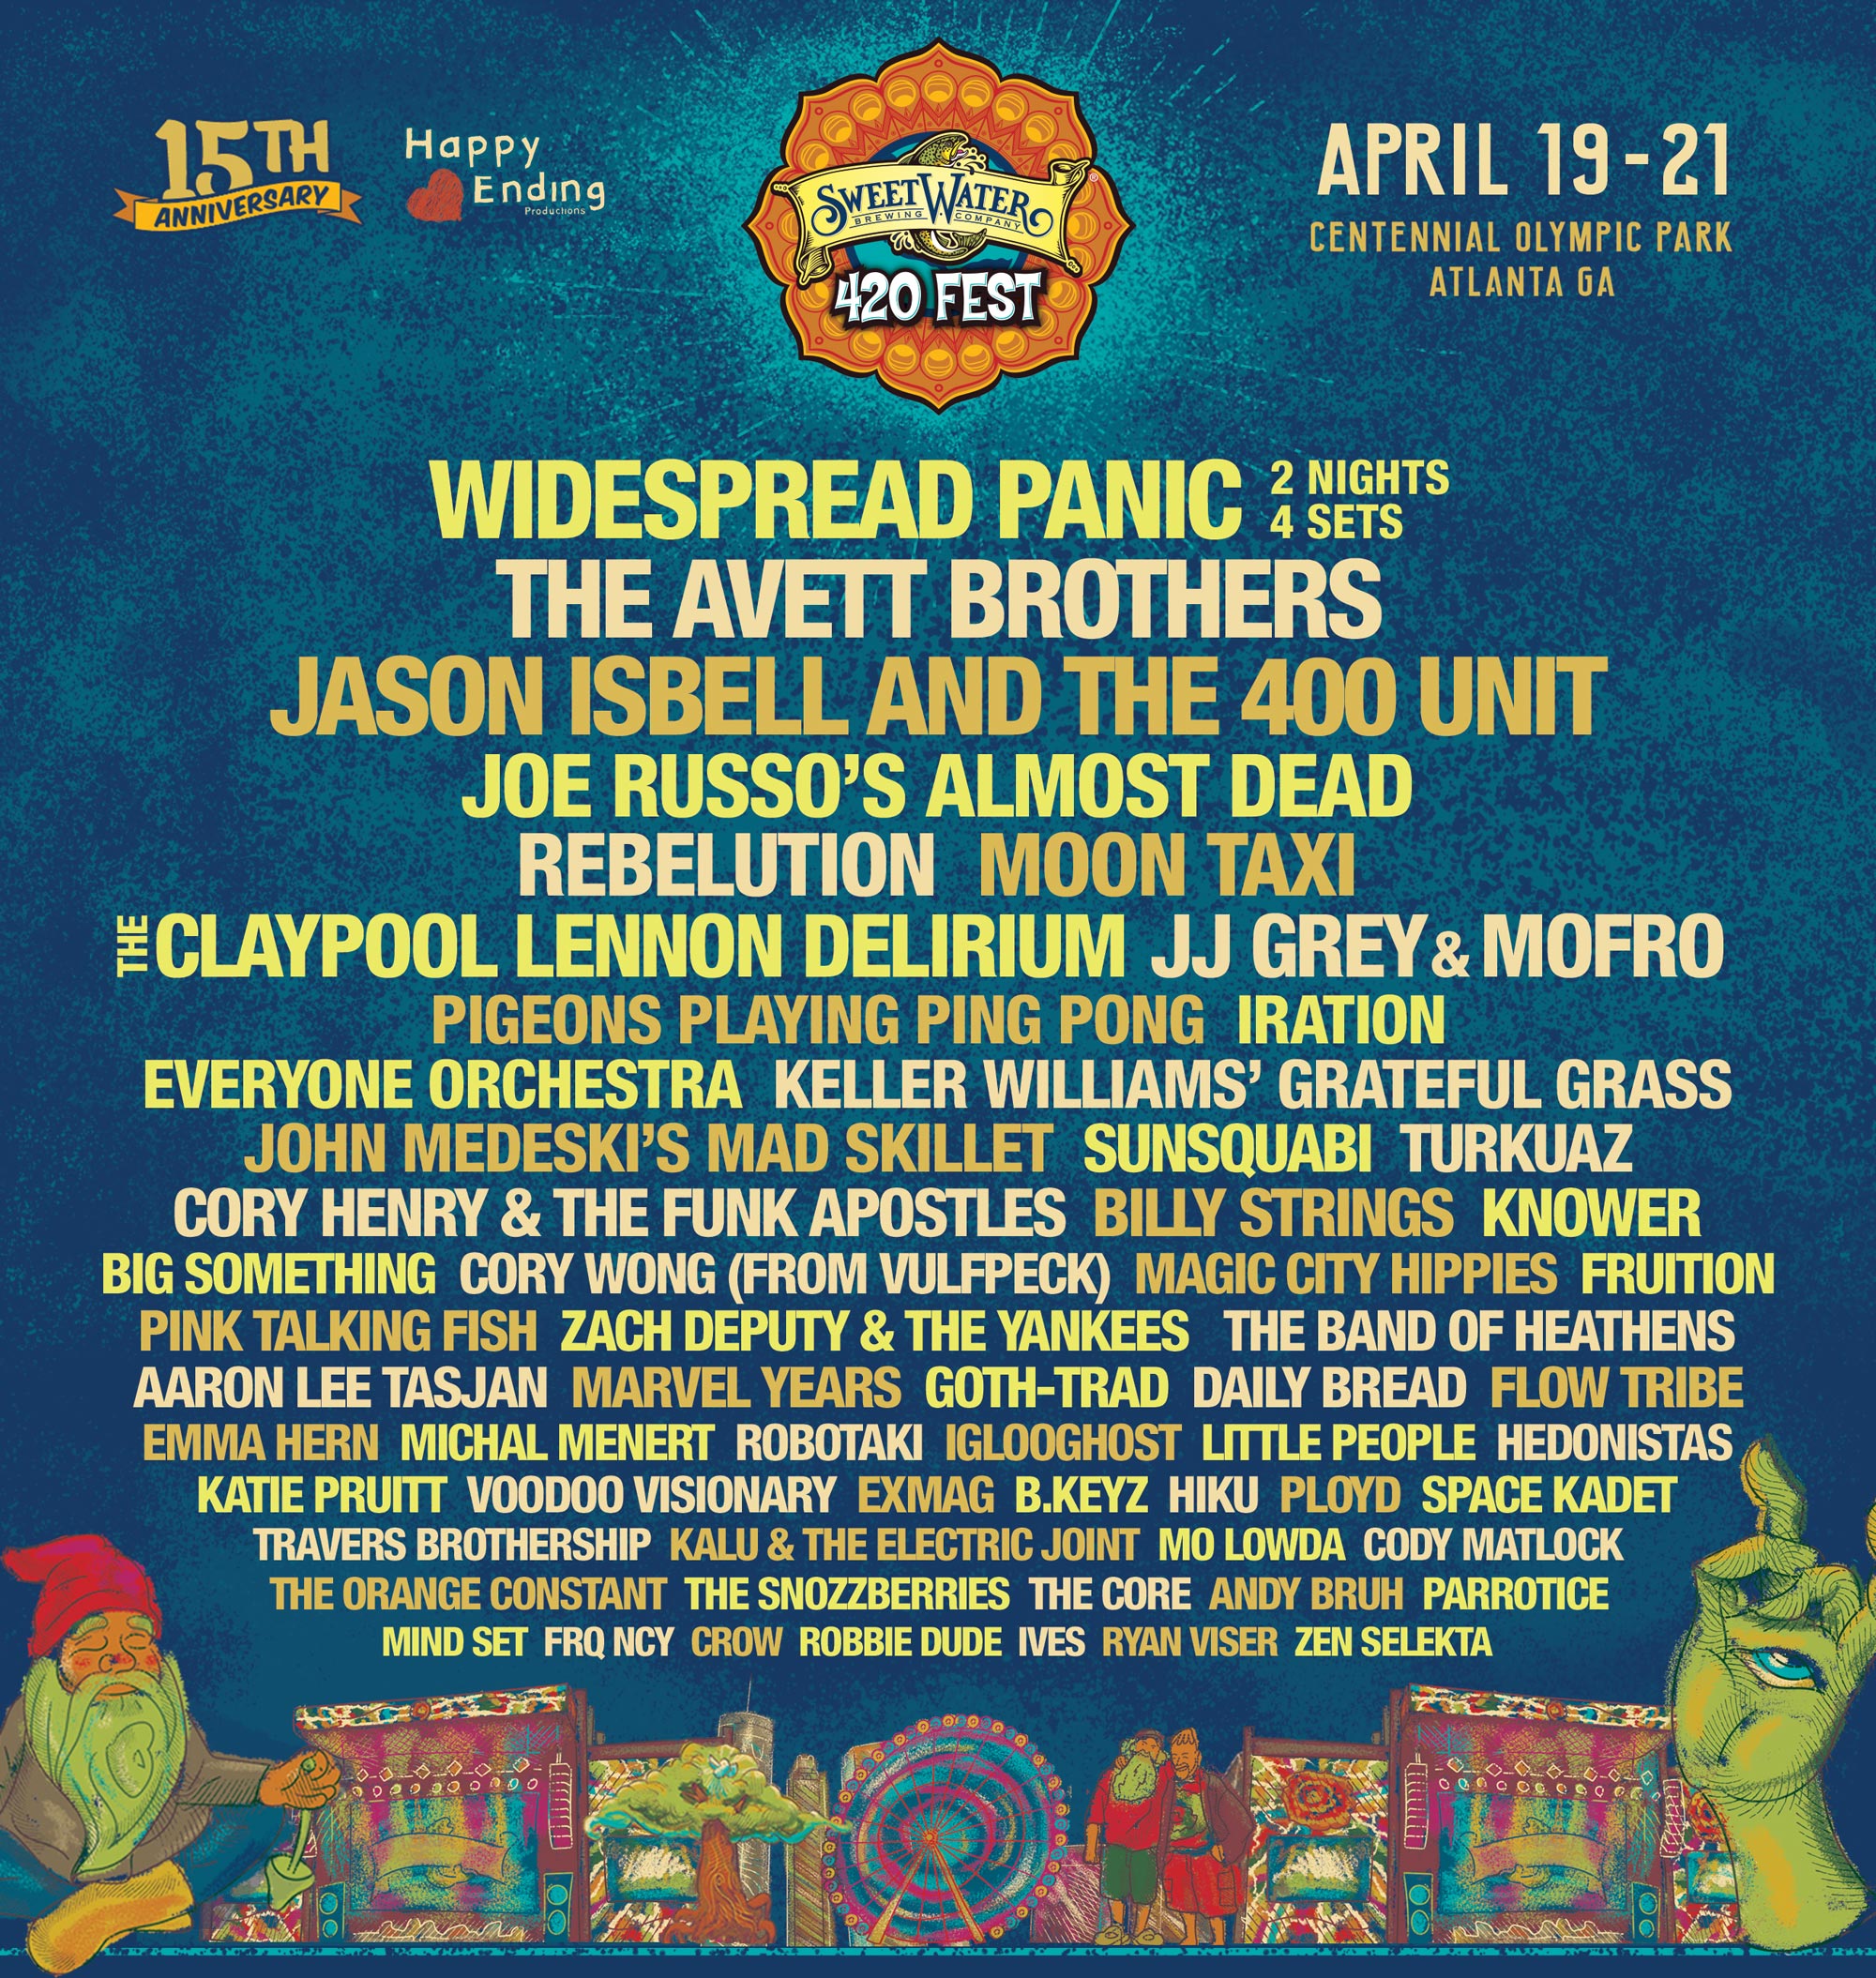 SweetWater 420 Fest 2019 - Saturday April 20th | Creative Loafing